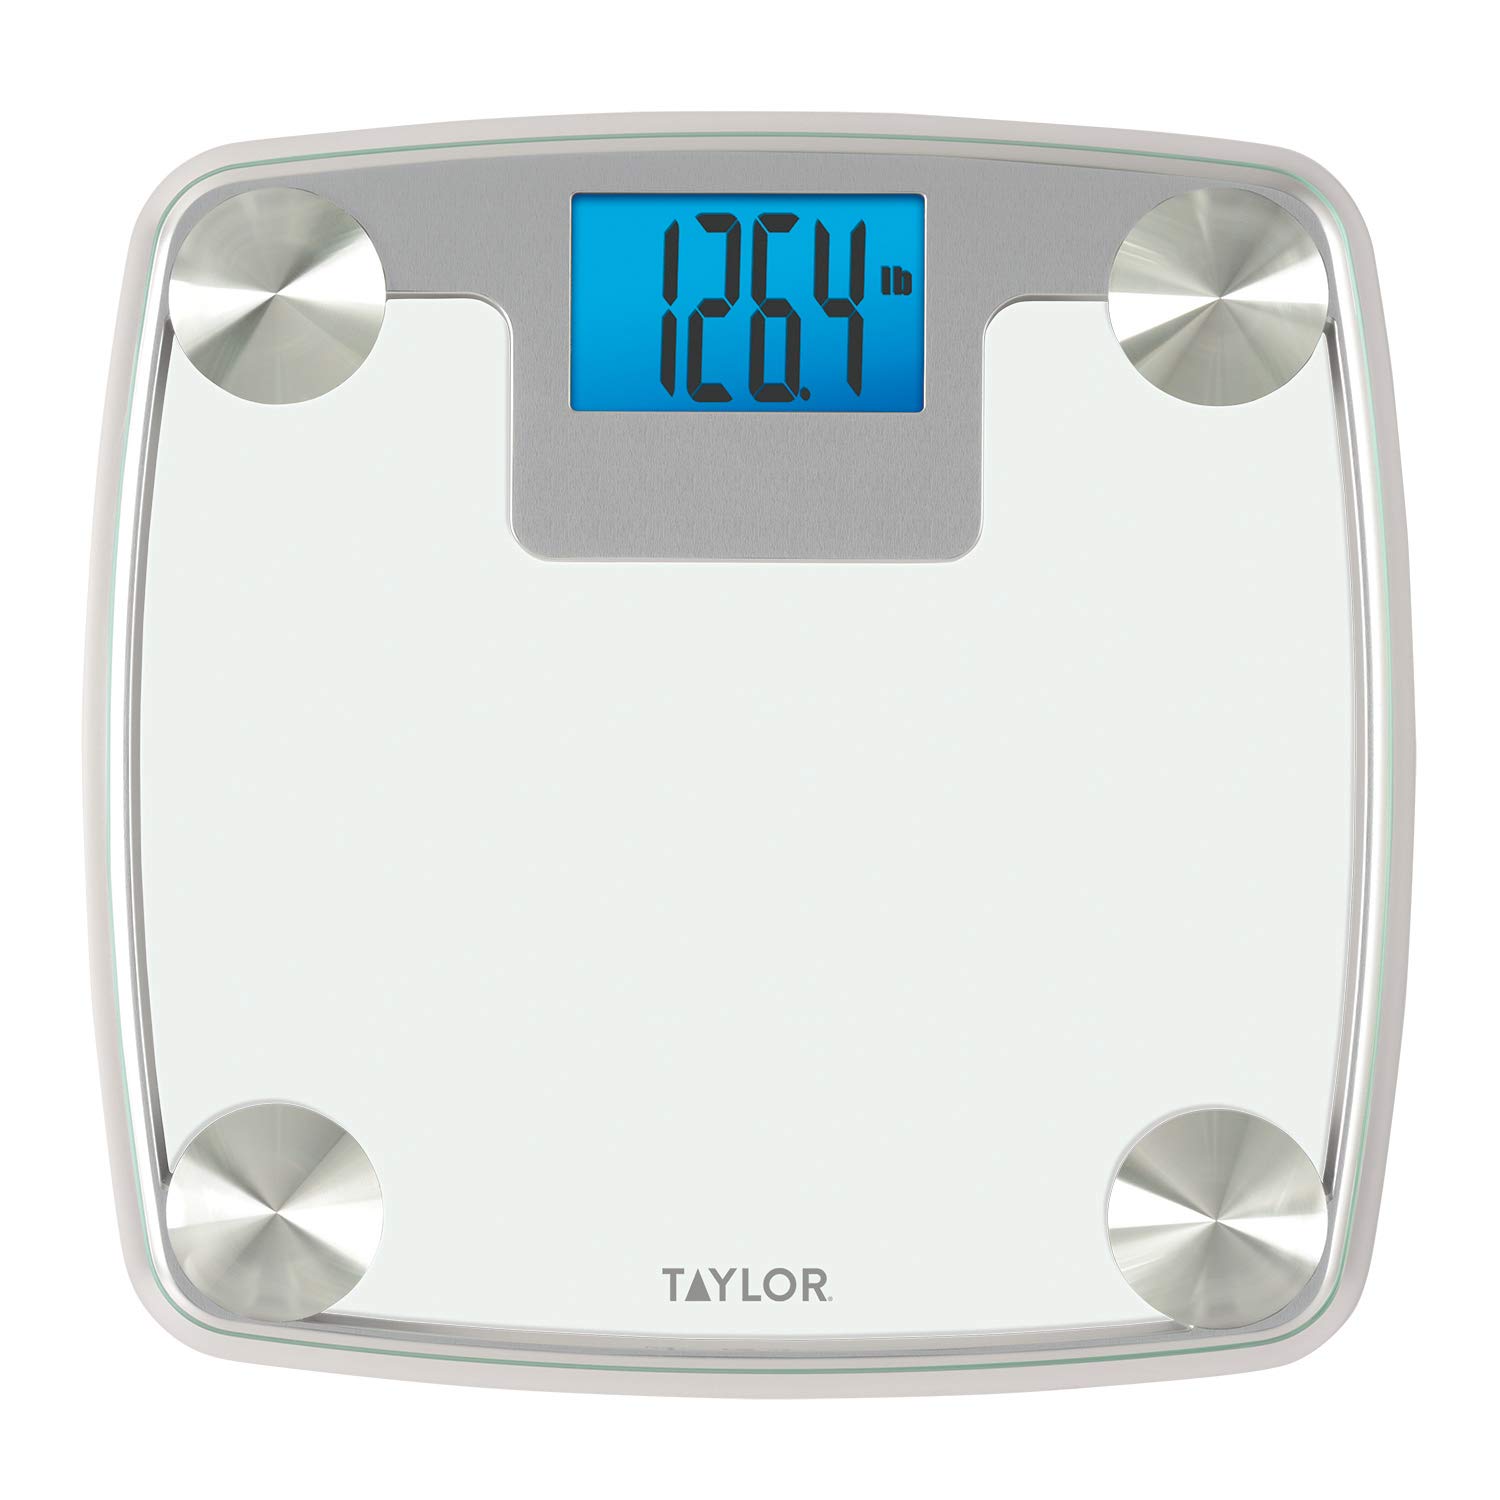 Taylor Precision Products Glass Digital Scale with Weight Tracking